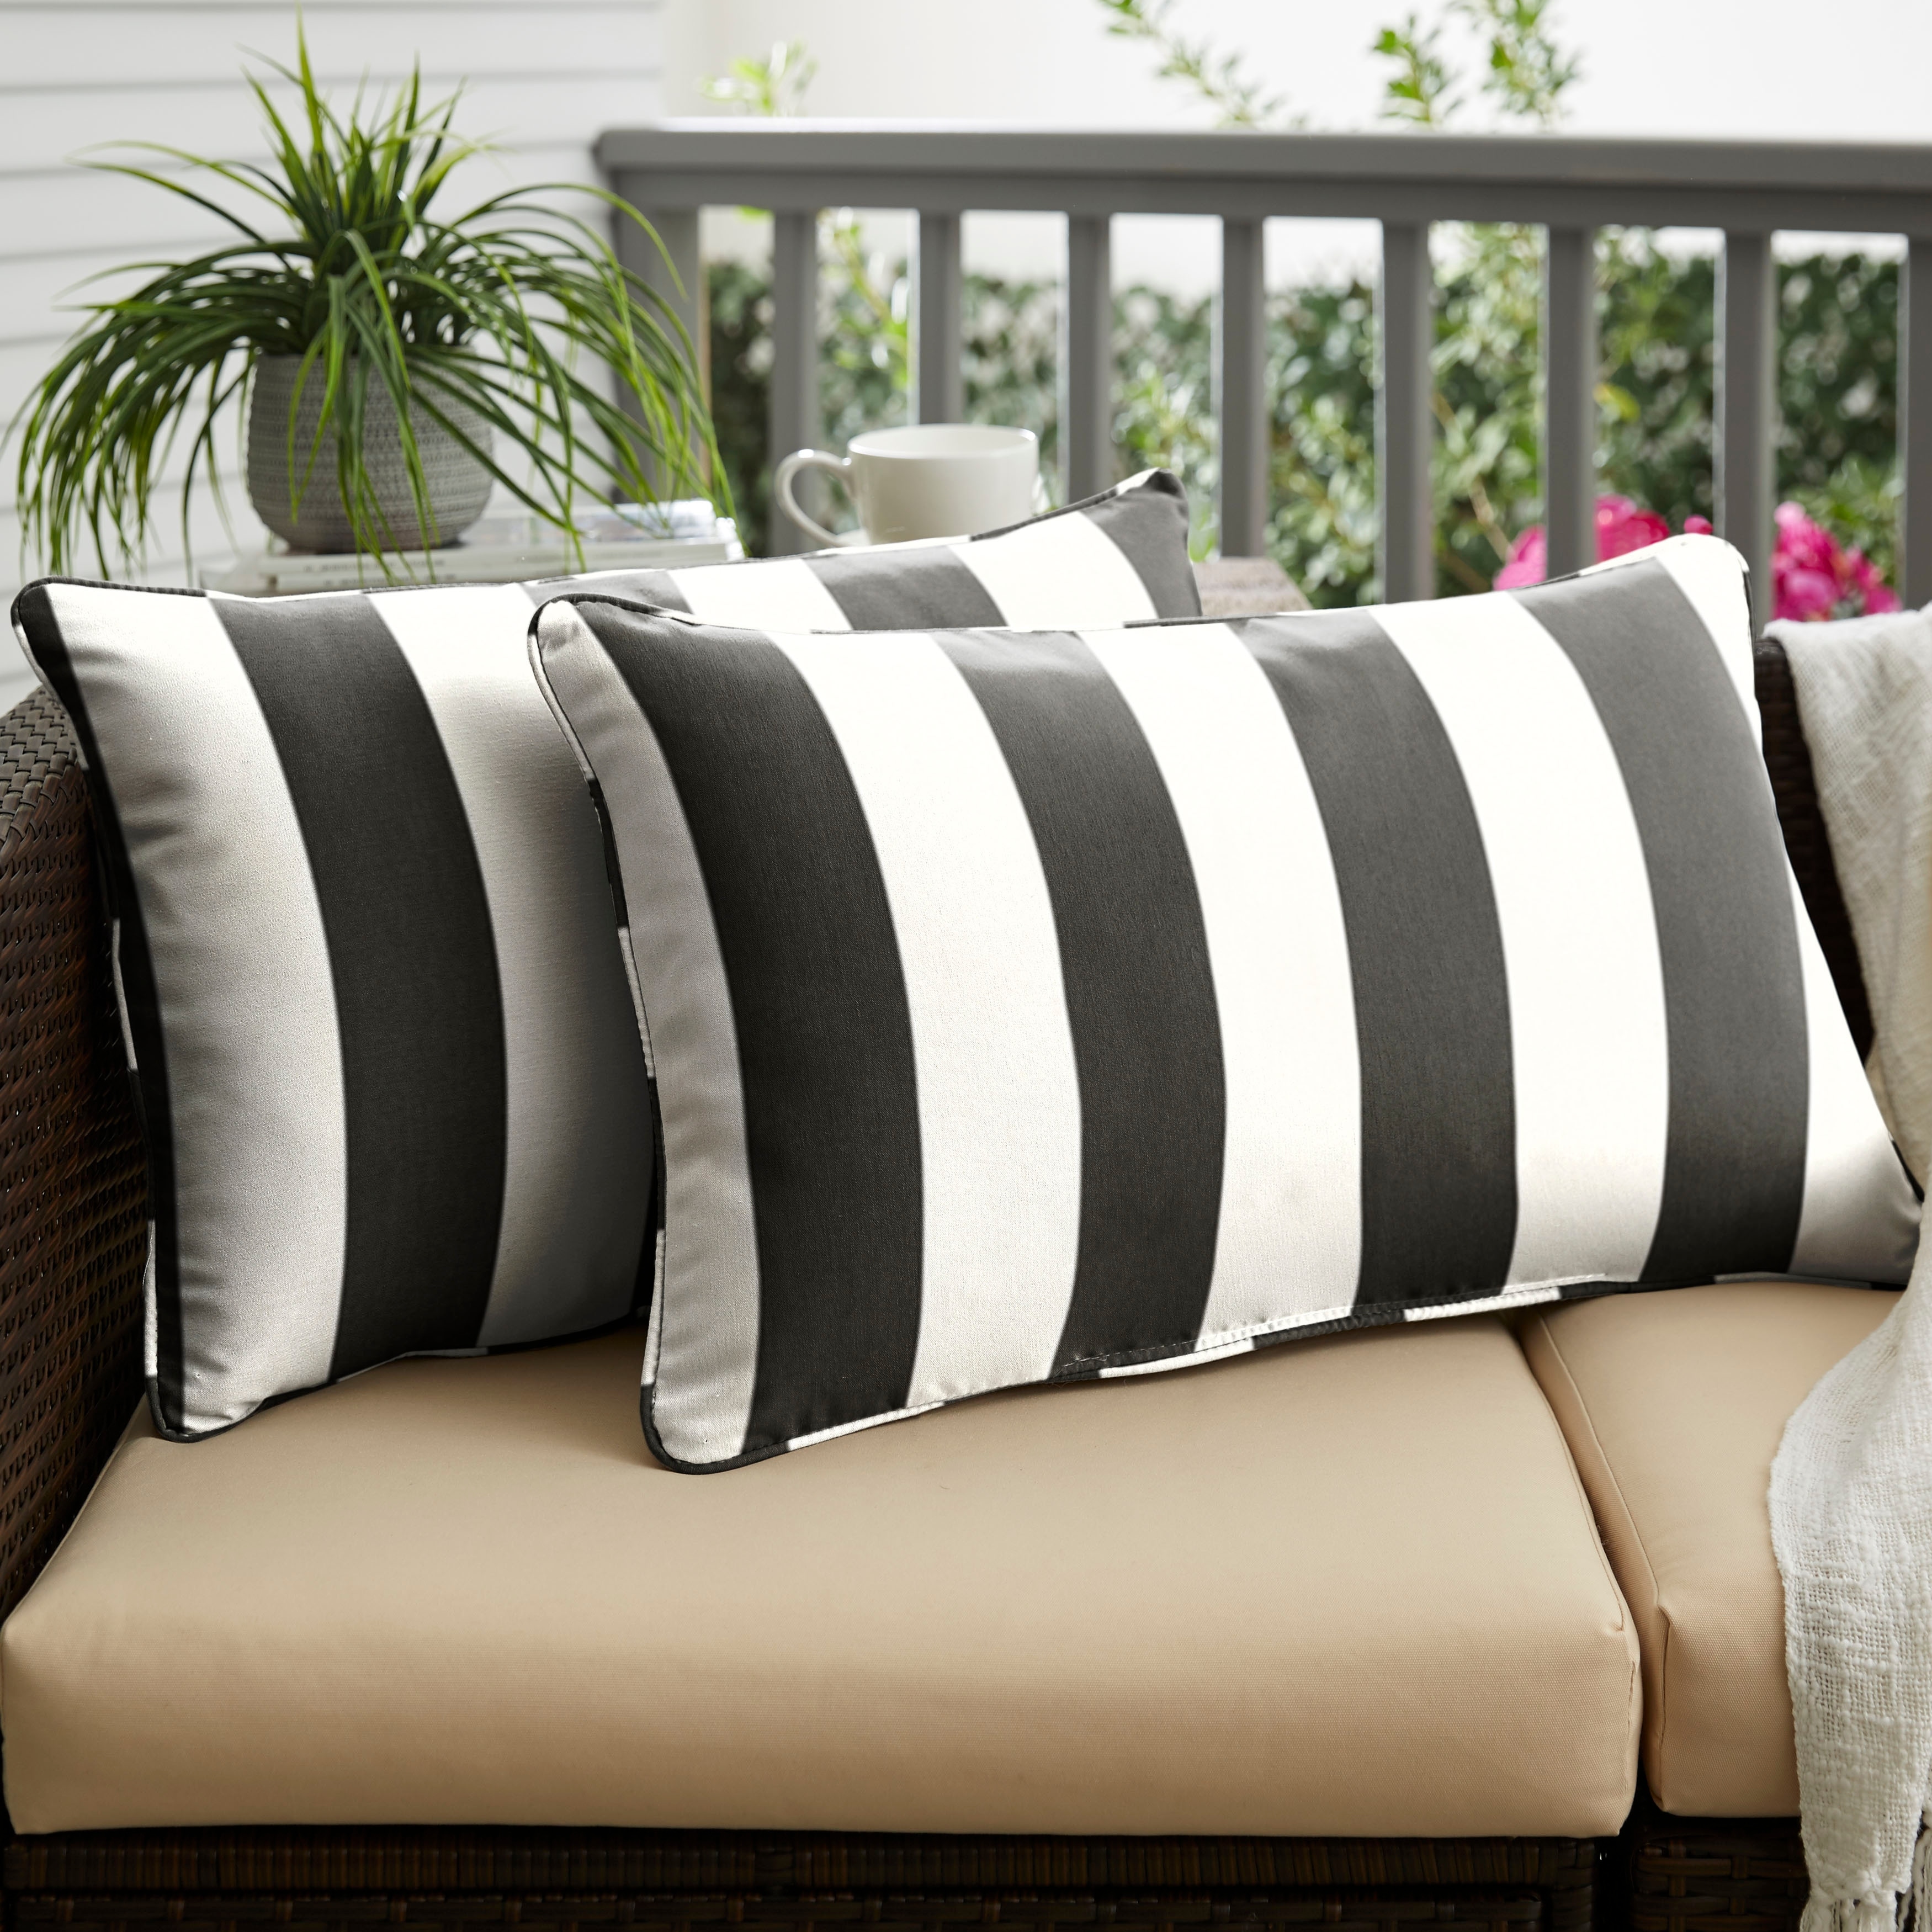 Set of 2 Southern Living 18x18 White/Black Indoor/Outdoor Pillows